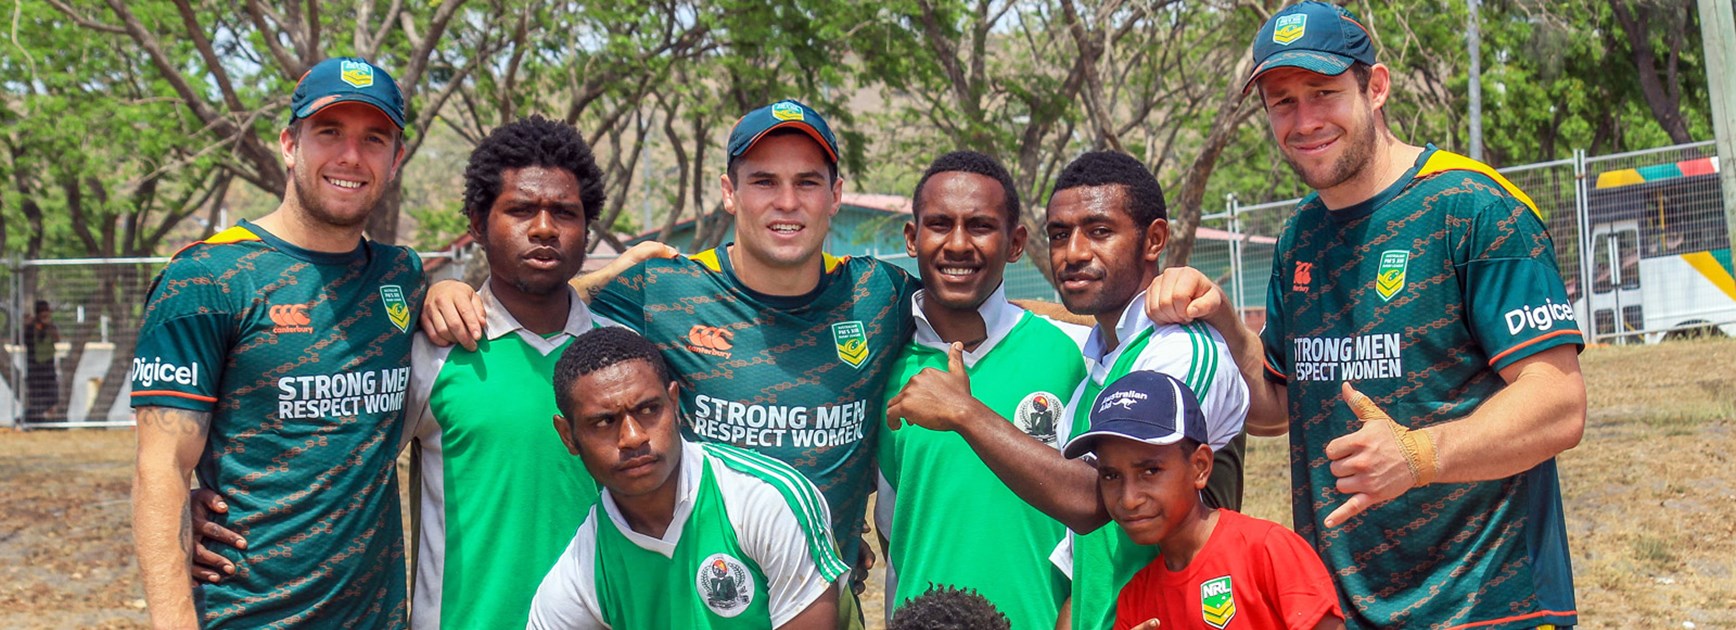 Australian Prime Minister's XIII representatives Kane Elgey, Daniel Mortimer and Jeremy Latimore participate in a League Bilong Laif schools rugby league clinic in Port Moresby.